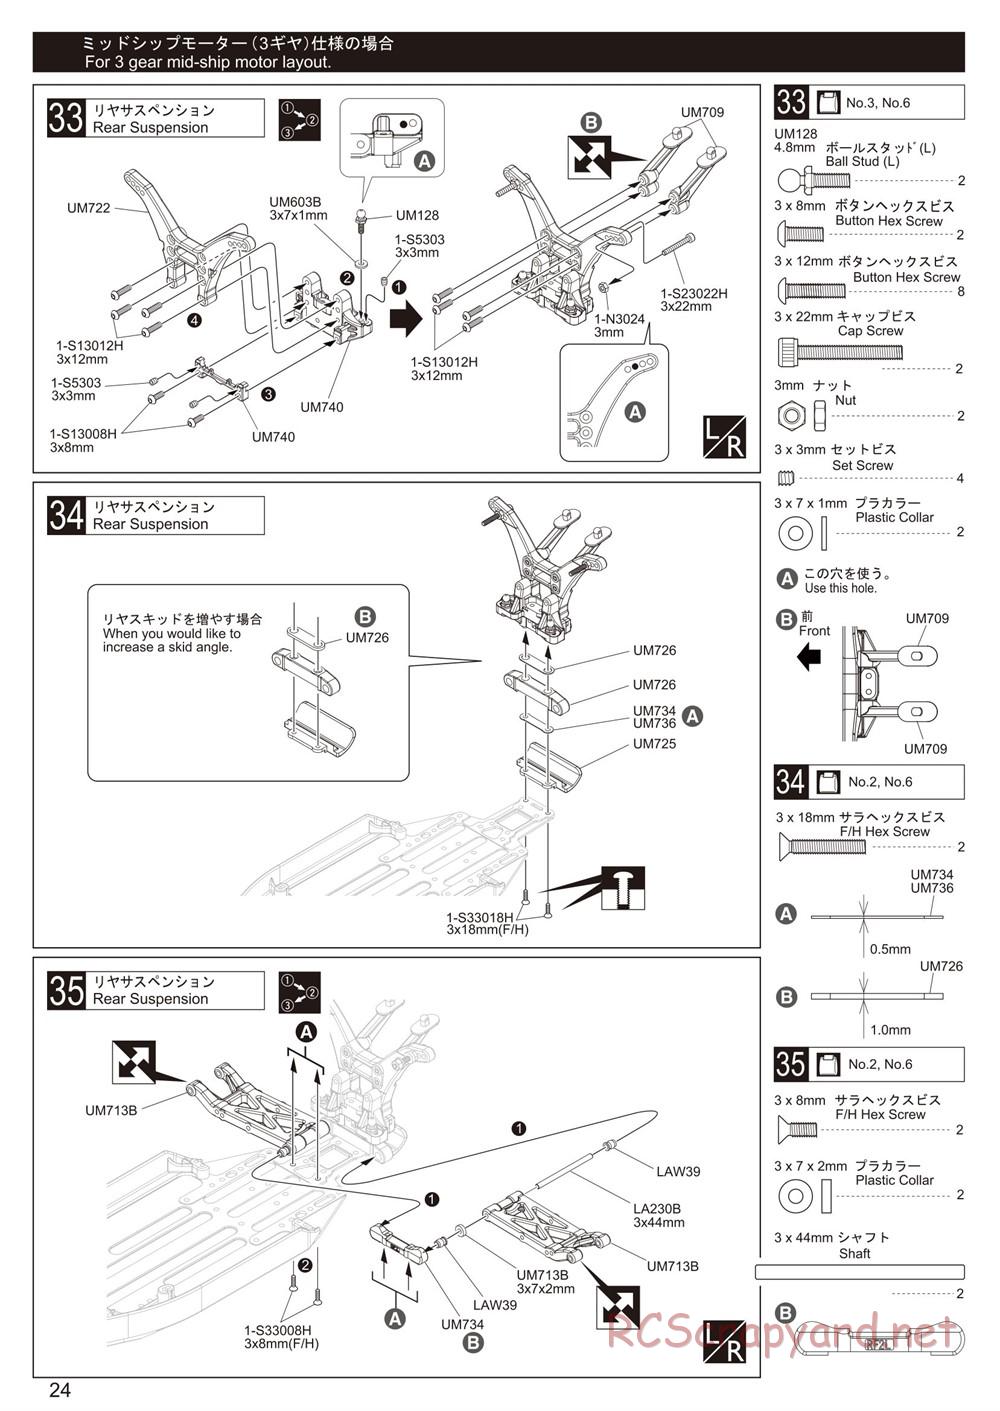 Kyosho - Ultima RB6.6 - Manual - Page 24